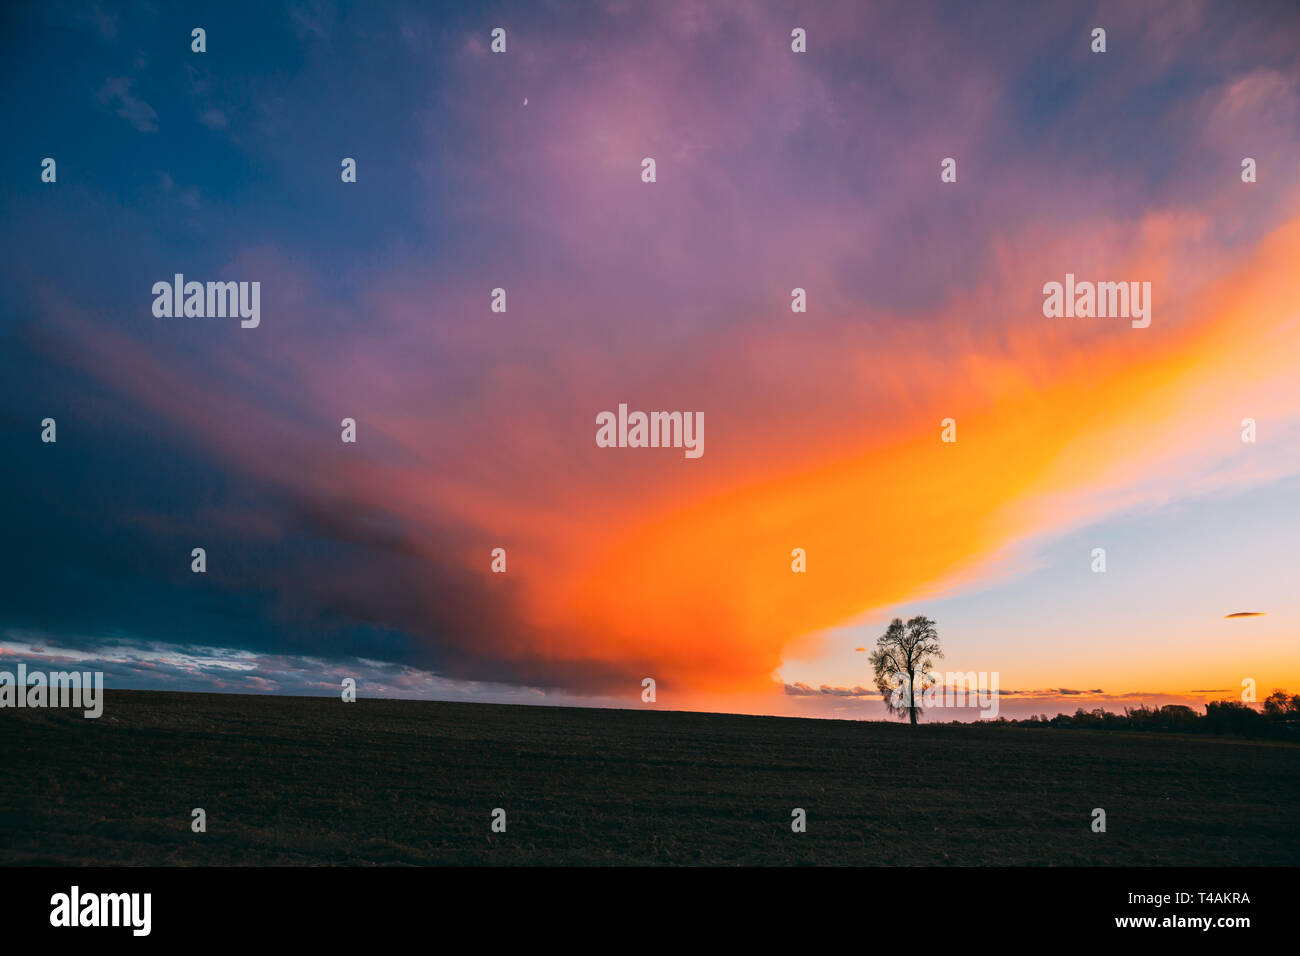 Time Lapse Time-lapse Timelapse Of Lonely Tree Growing In Spring Field At Sunset Sunrise. Morning Sunrise Evening Sunset Sky Above Dark Countryside Me Stock Photo